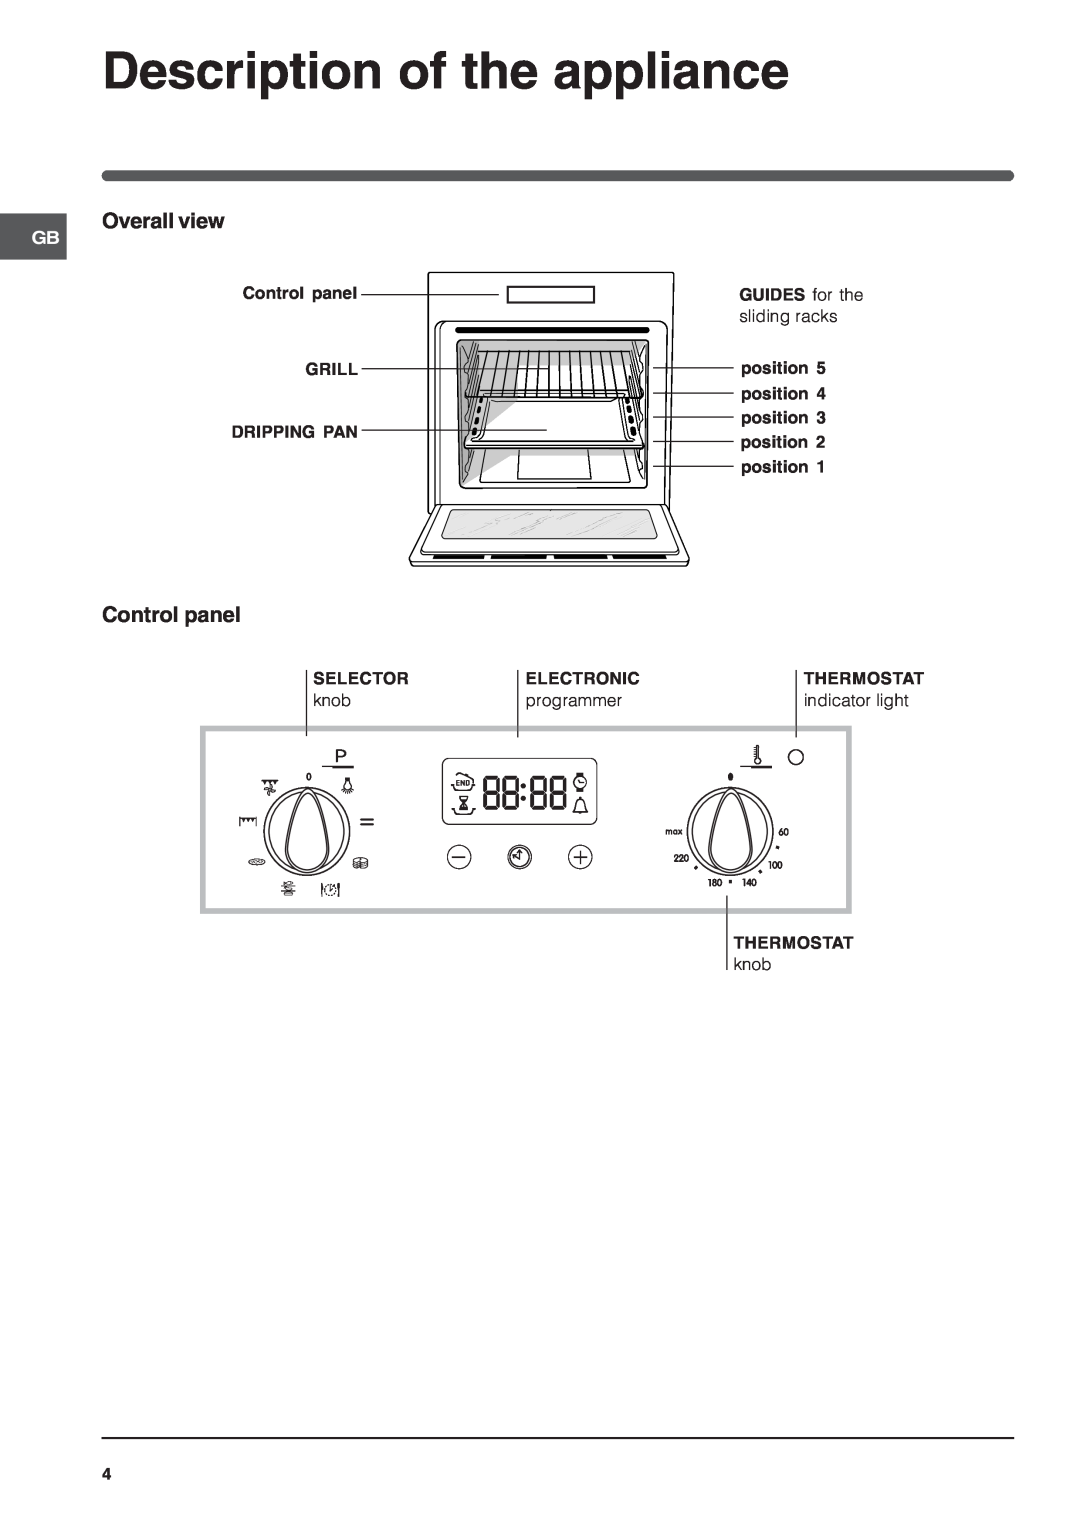 Indesit FIE 76 KC.A IX GB/1 Description of the appliance, Overall view, Control panel GRILL DRIPPING PAN, Selector 